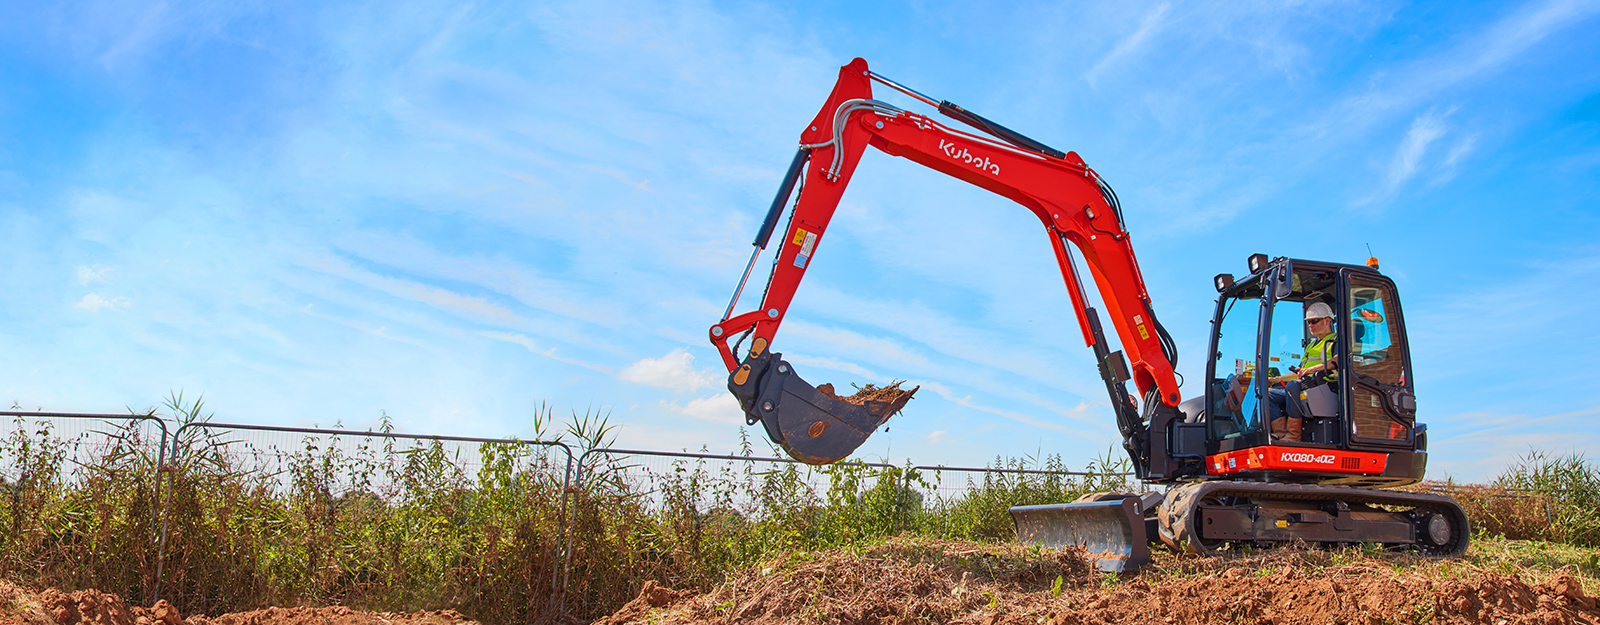 construction machinery | products & solutions | kubota global site